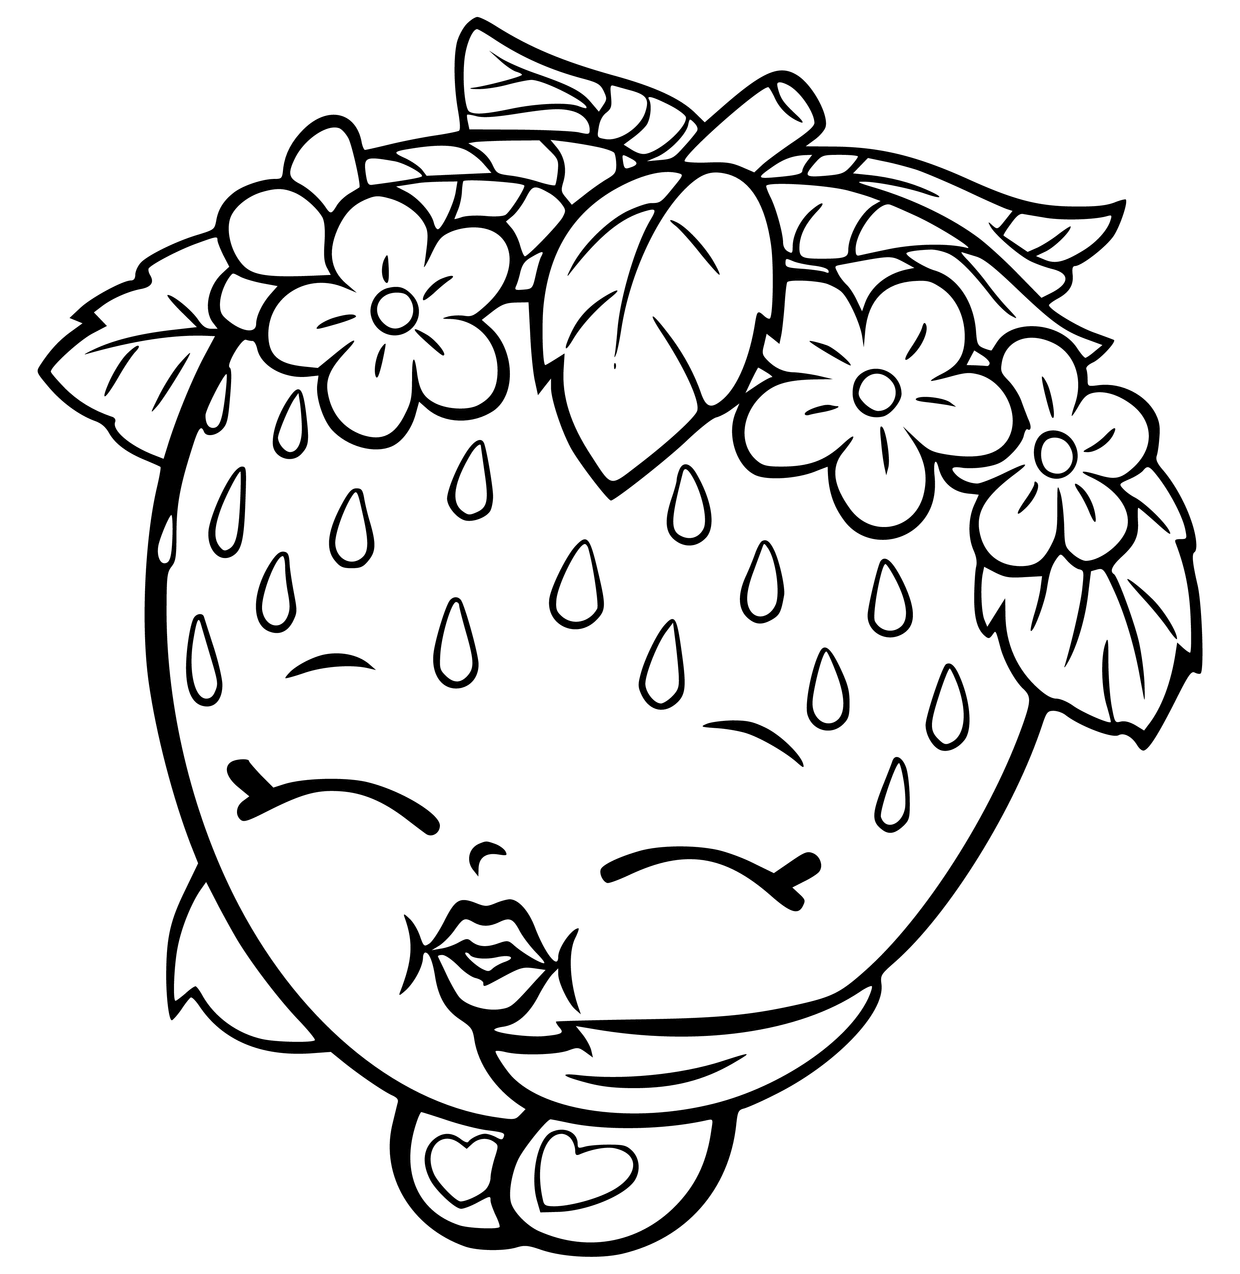 Shopkins Coloring Pages - Strawberry Kiss